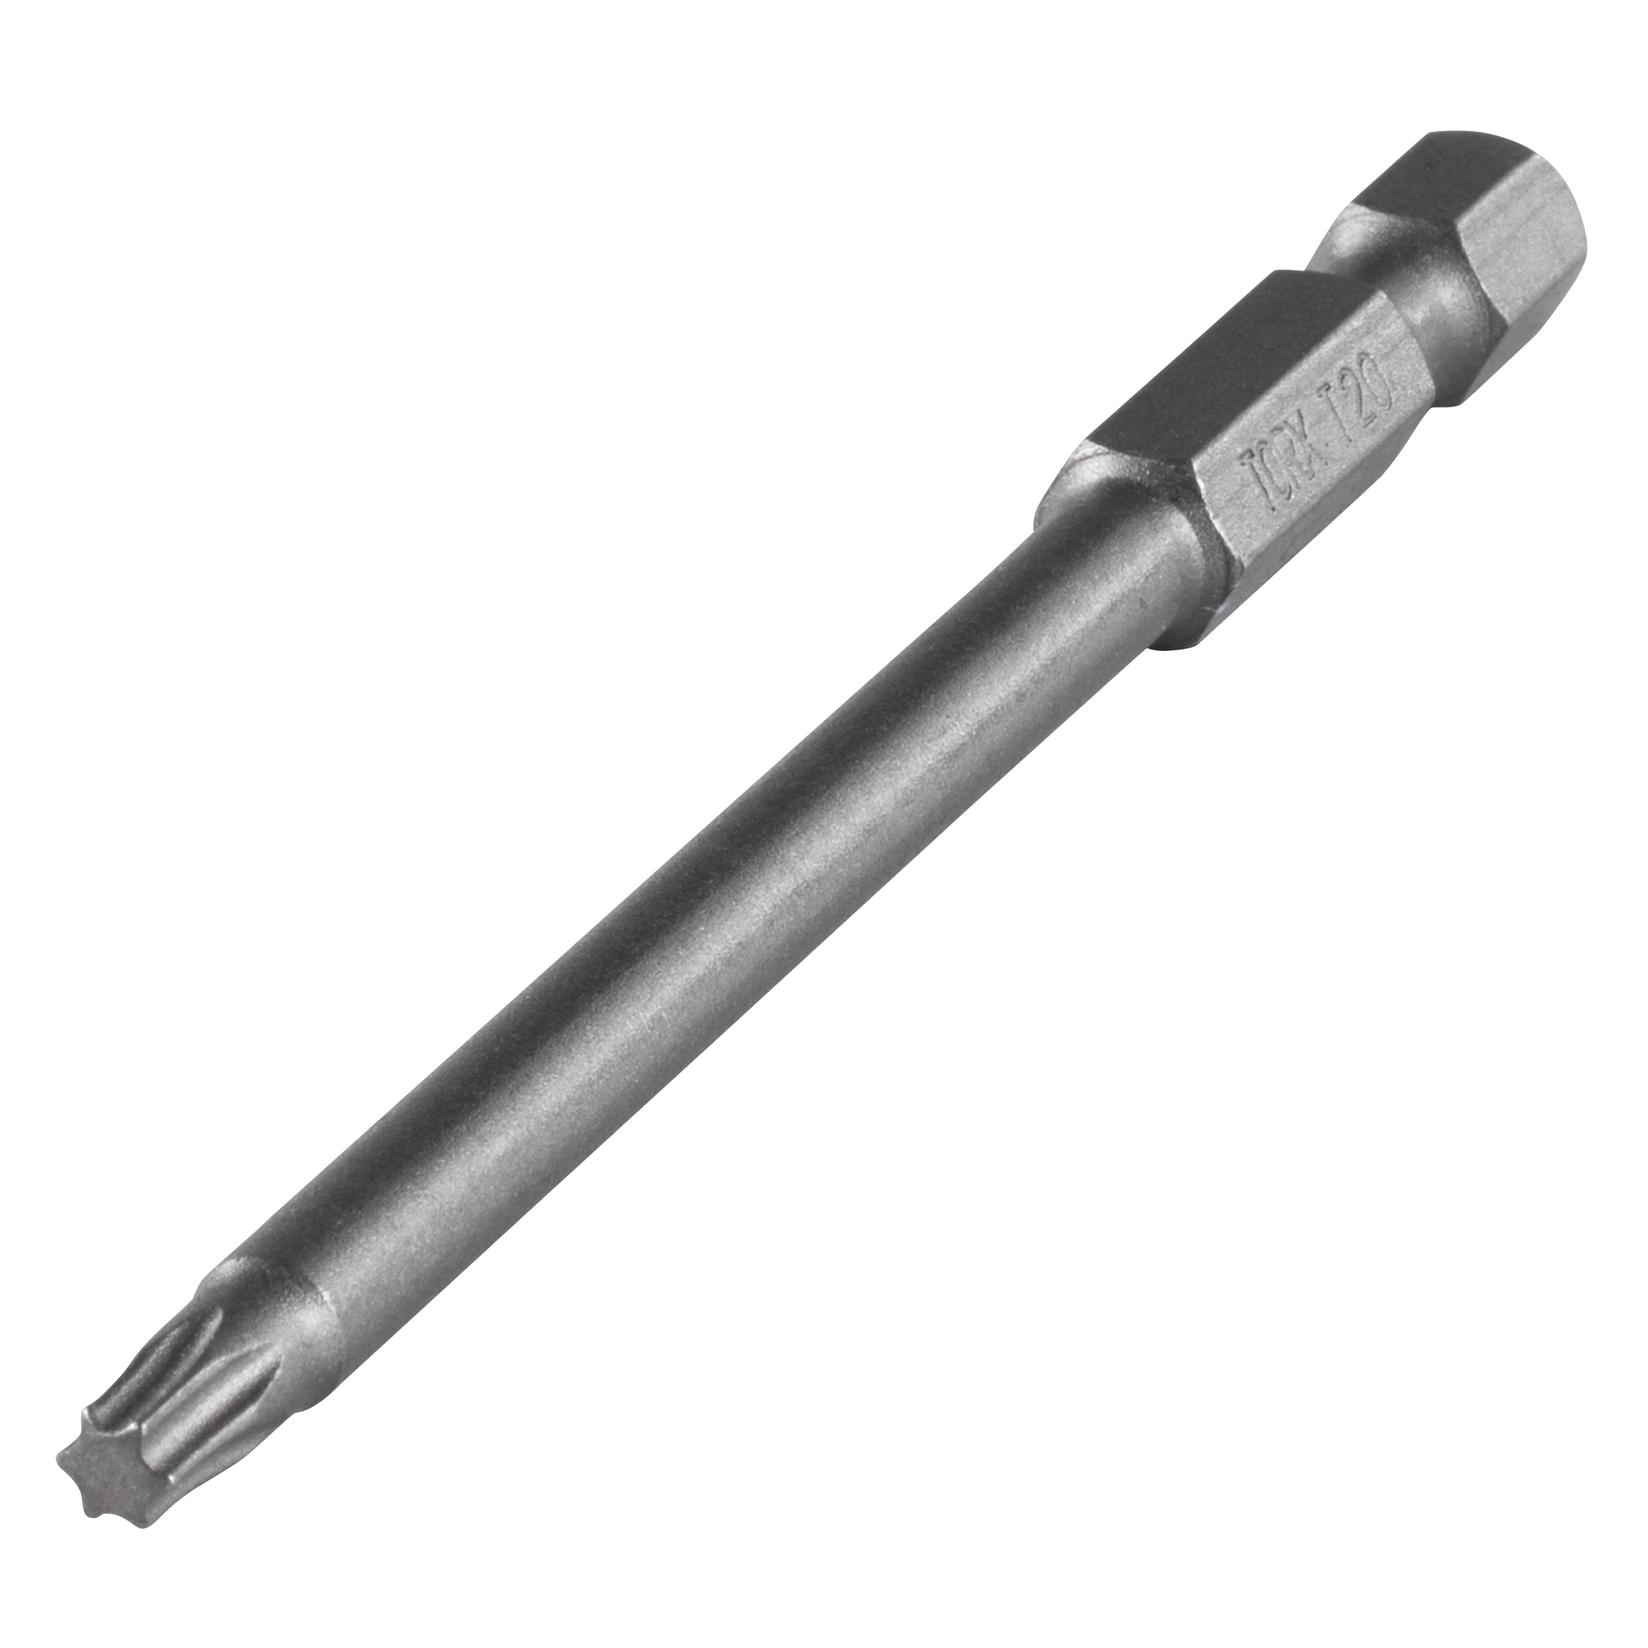 Selected image for WOLFCRAFT Bit Solid 89 mm Torx TX20 1249000